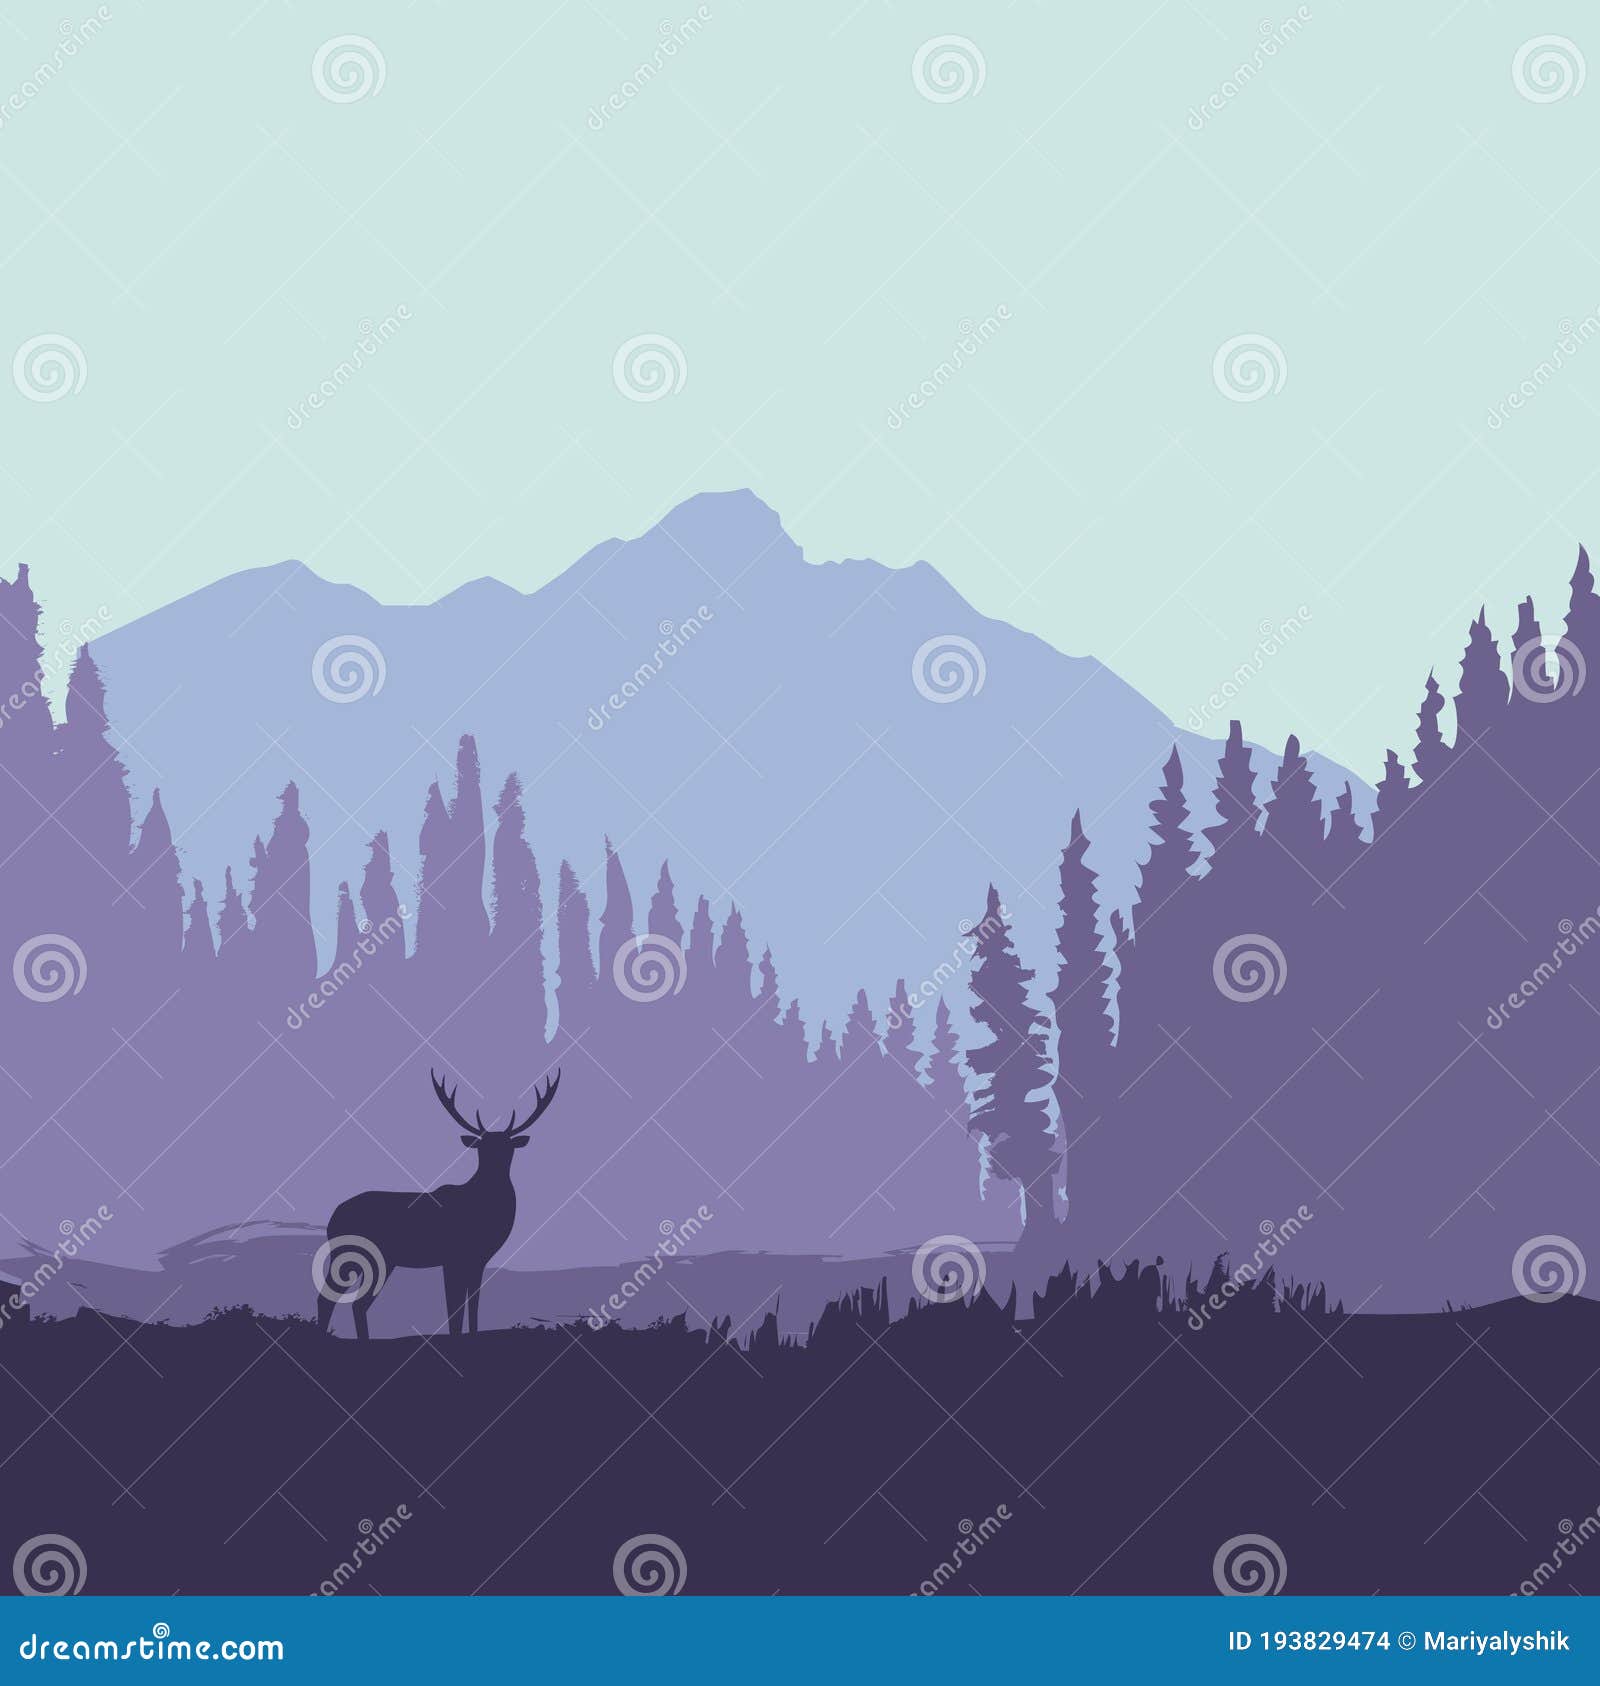 Deer Silhouette in Forest Near Mountains. Nature Landscape in ...